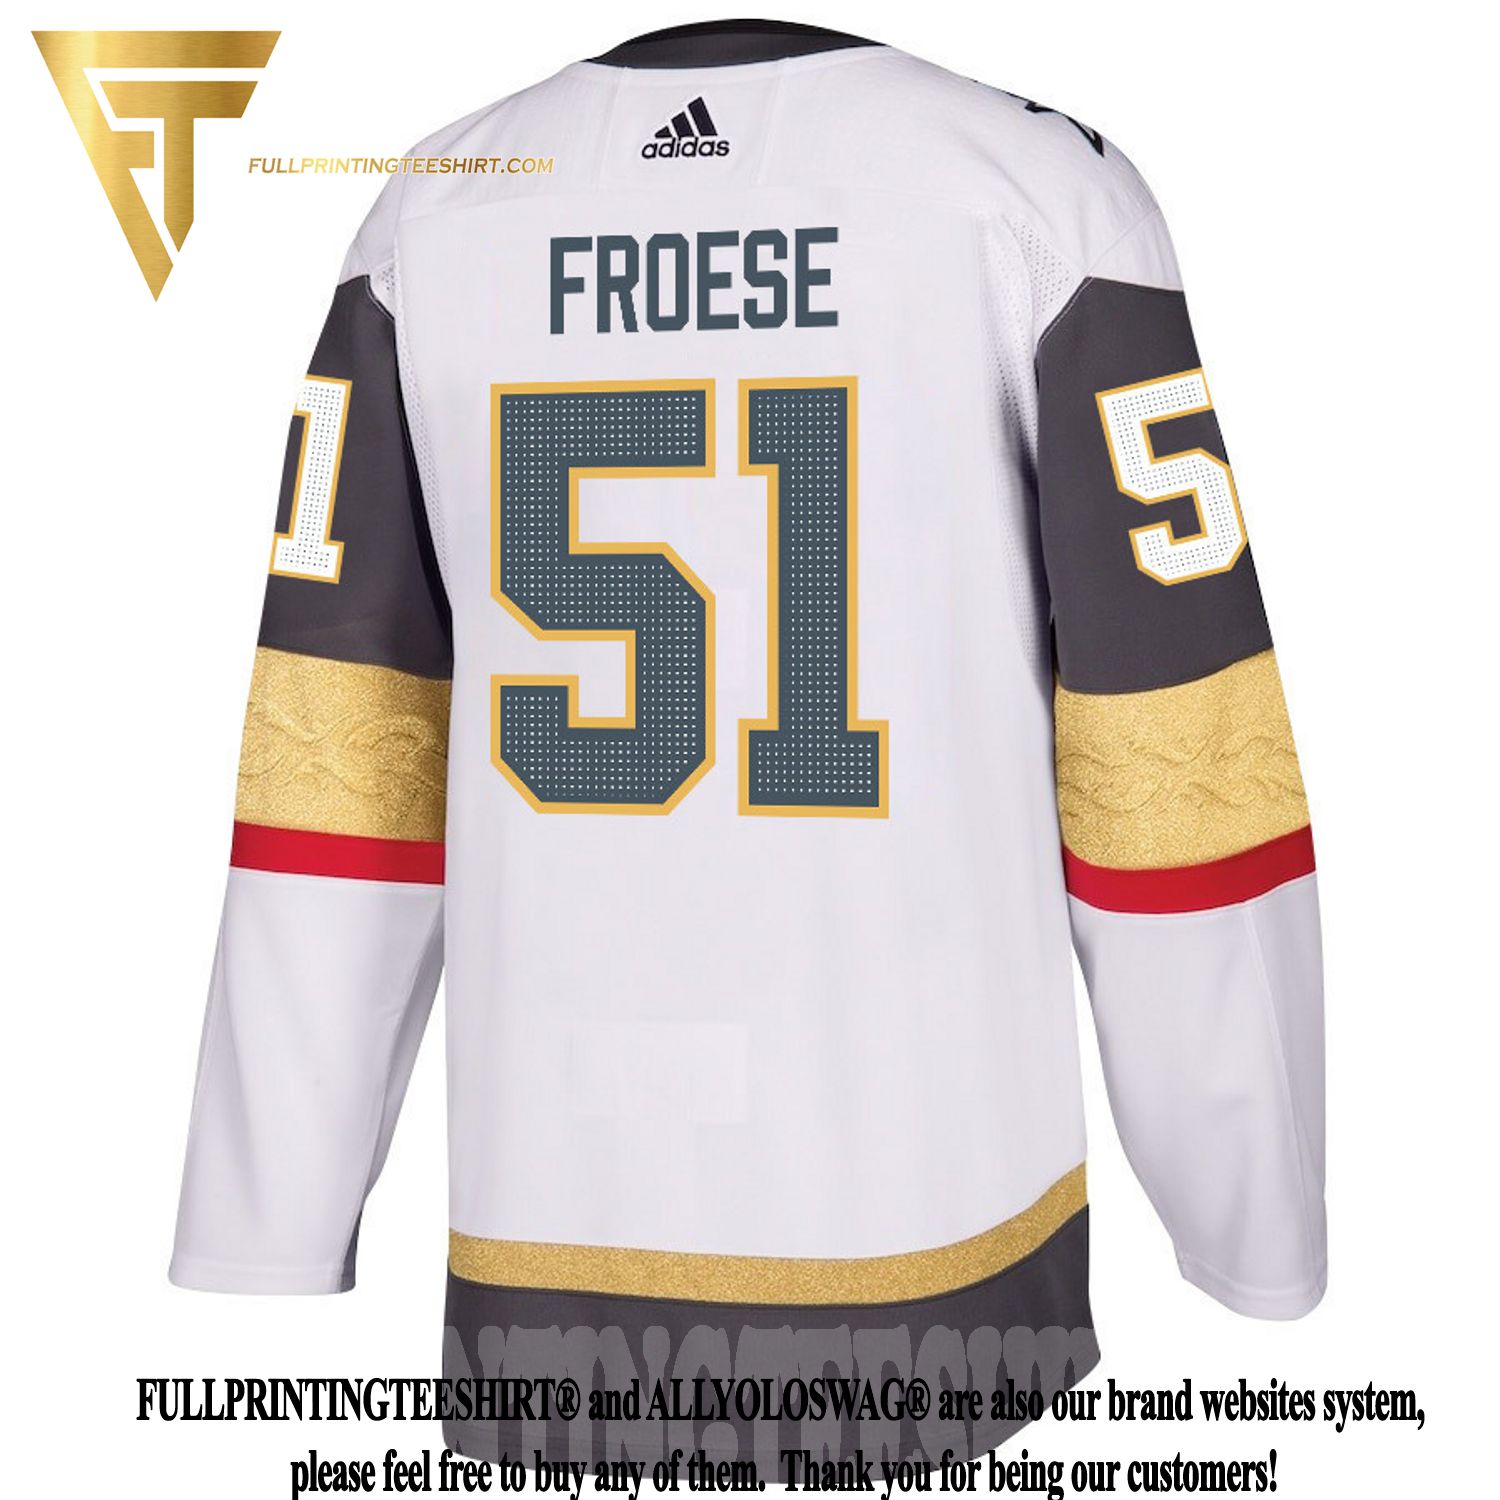 Aesthetic Changes For The Golden Knights In 2022-23